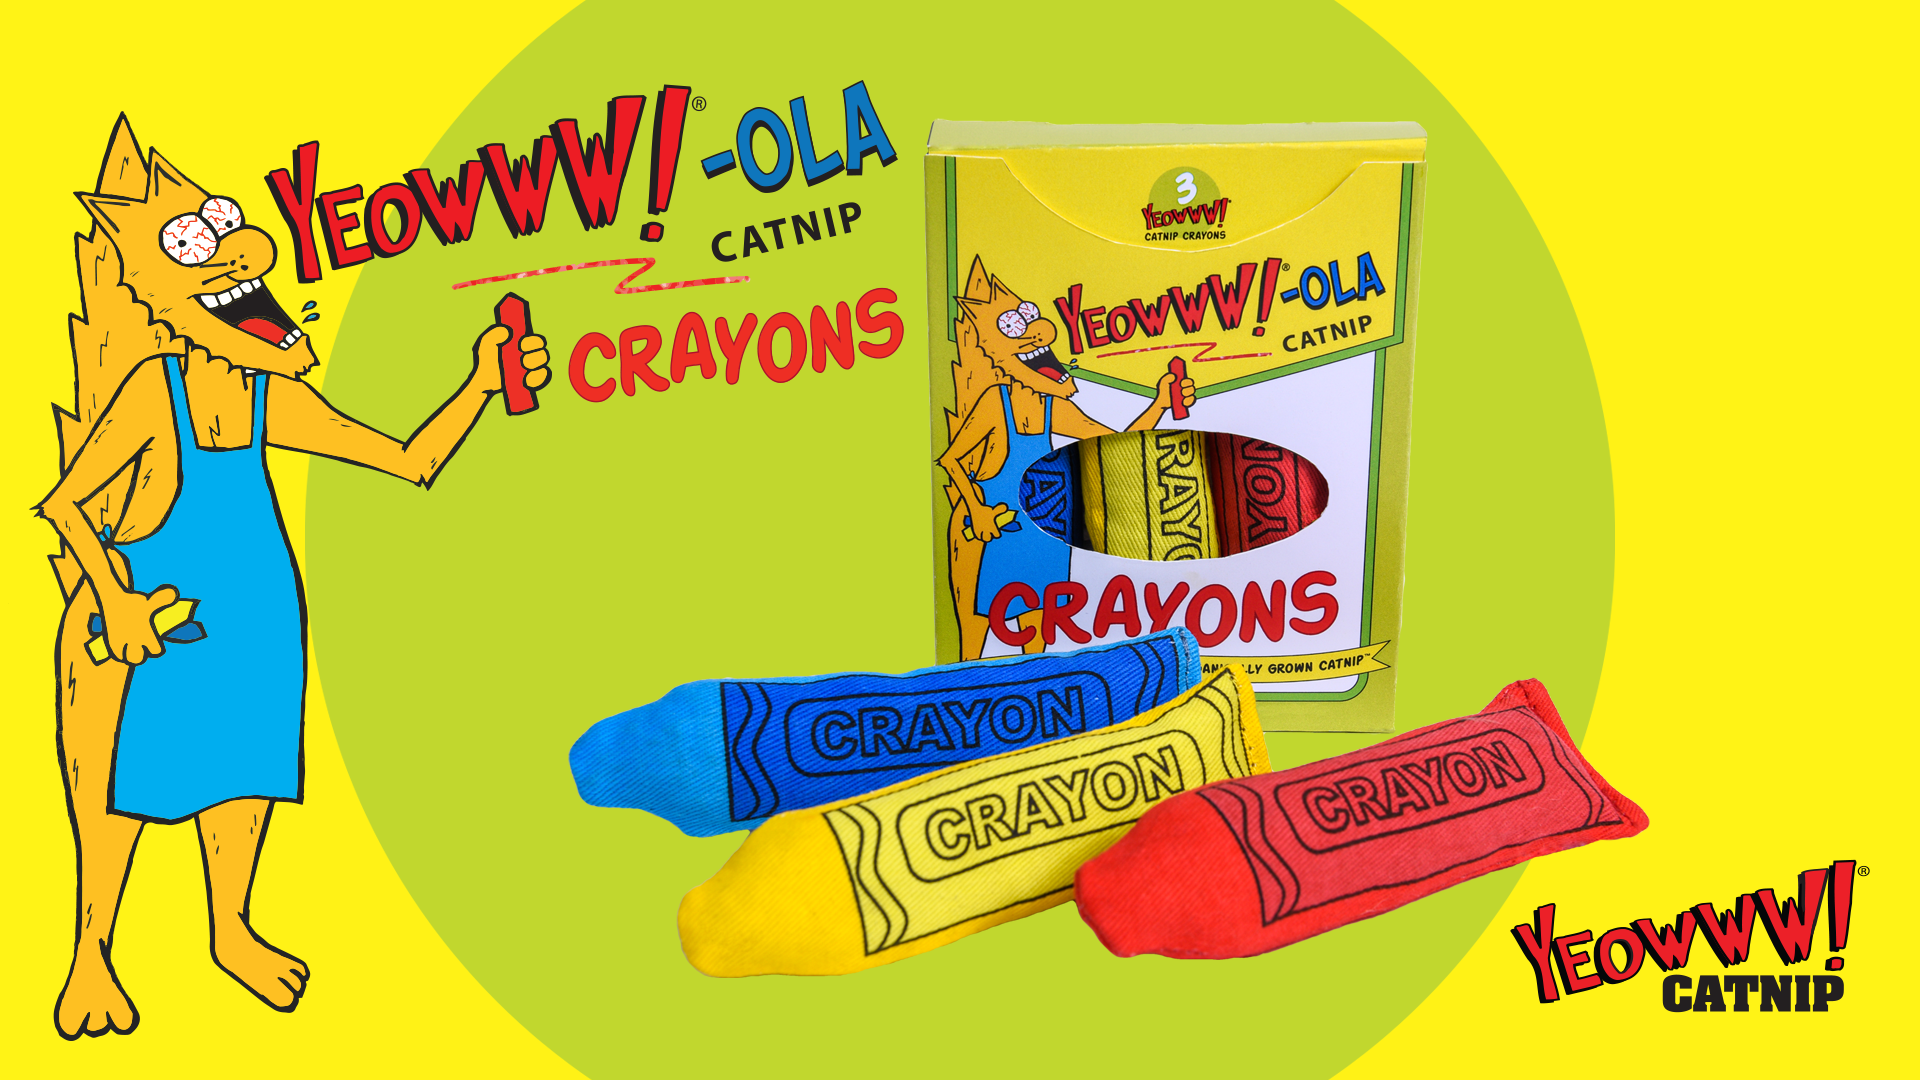 YEOWWW Ola Crayons - Hillbilly House Panthers